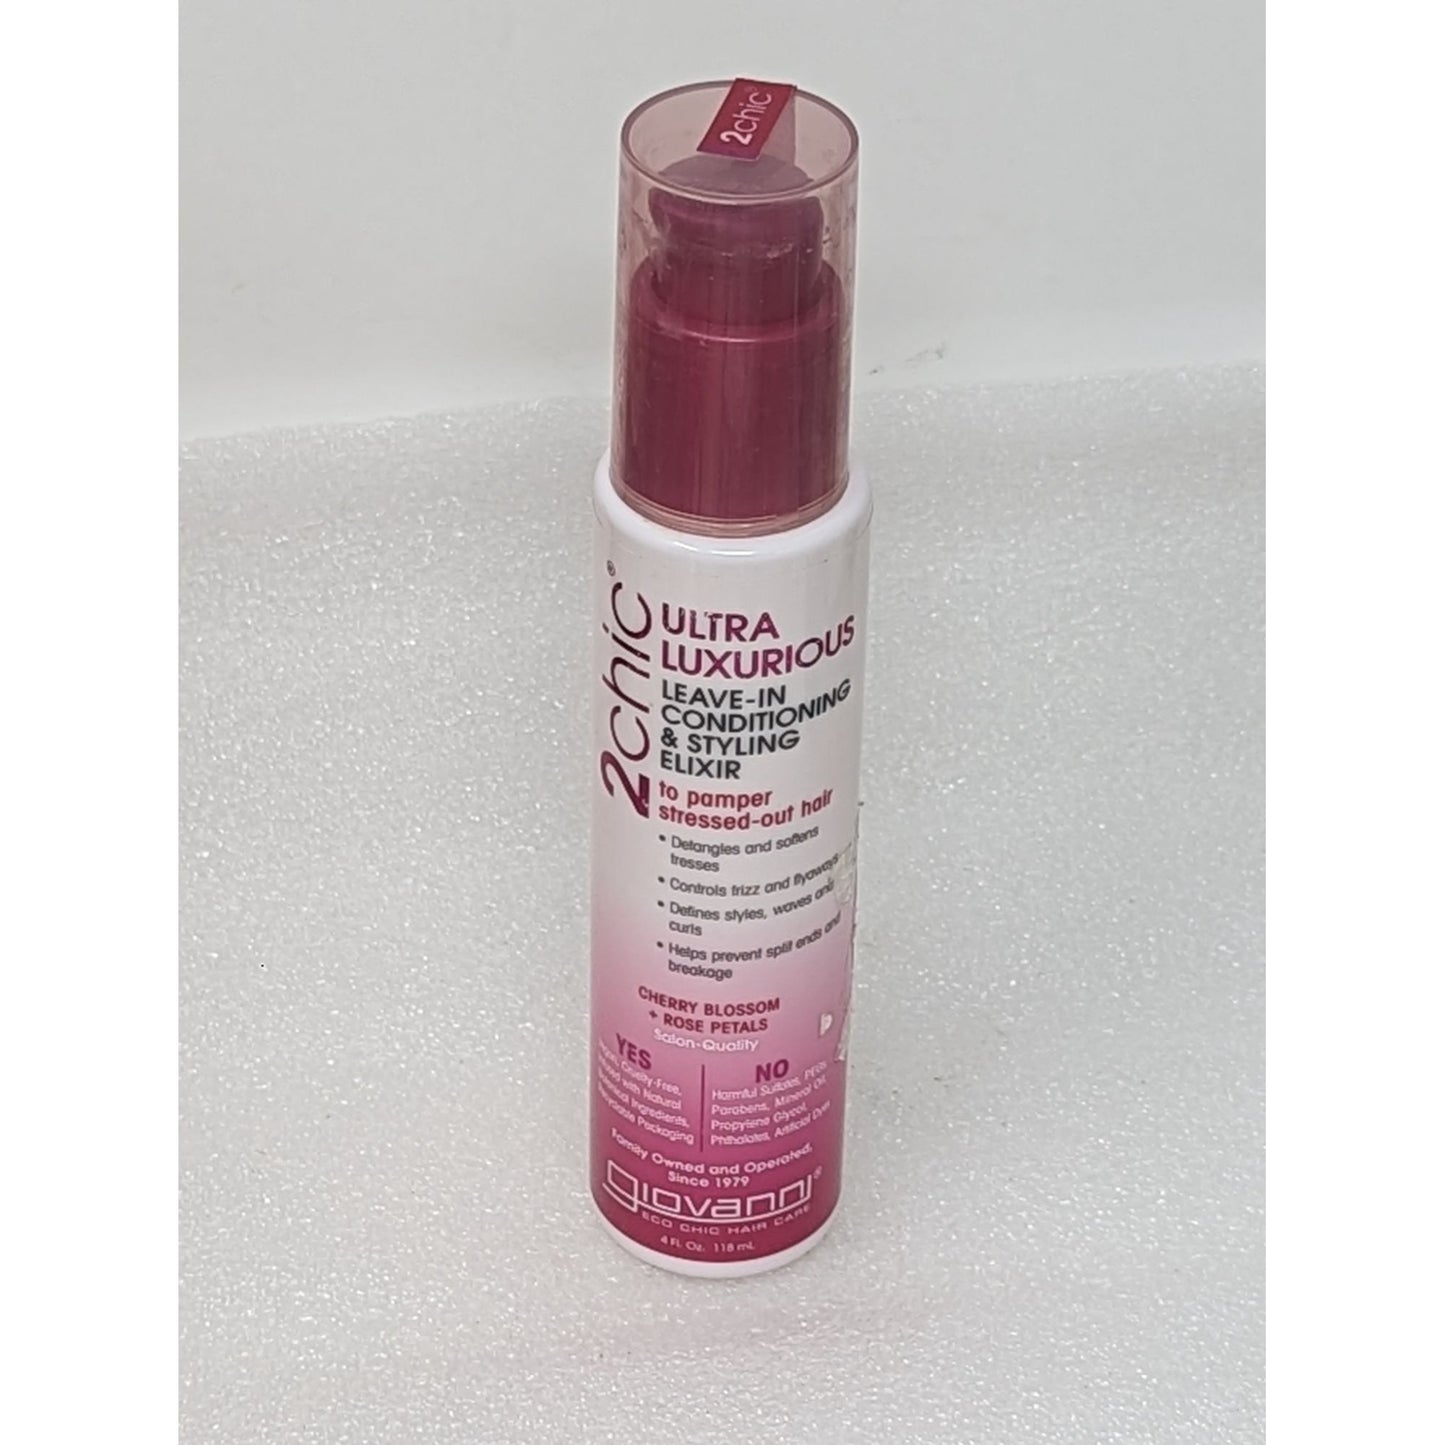 2Chic Cherry Blossom & Rose Petals Leave In Conditioning & Styling Elixer 4 oz